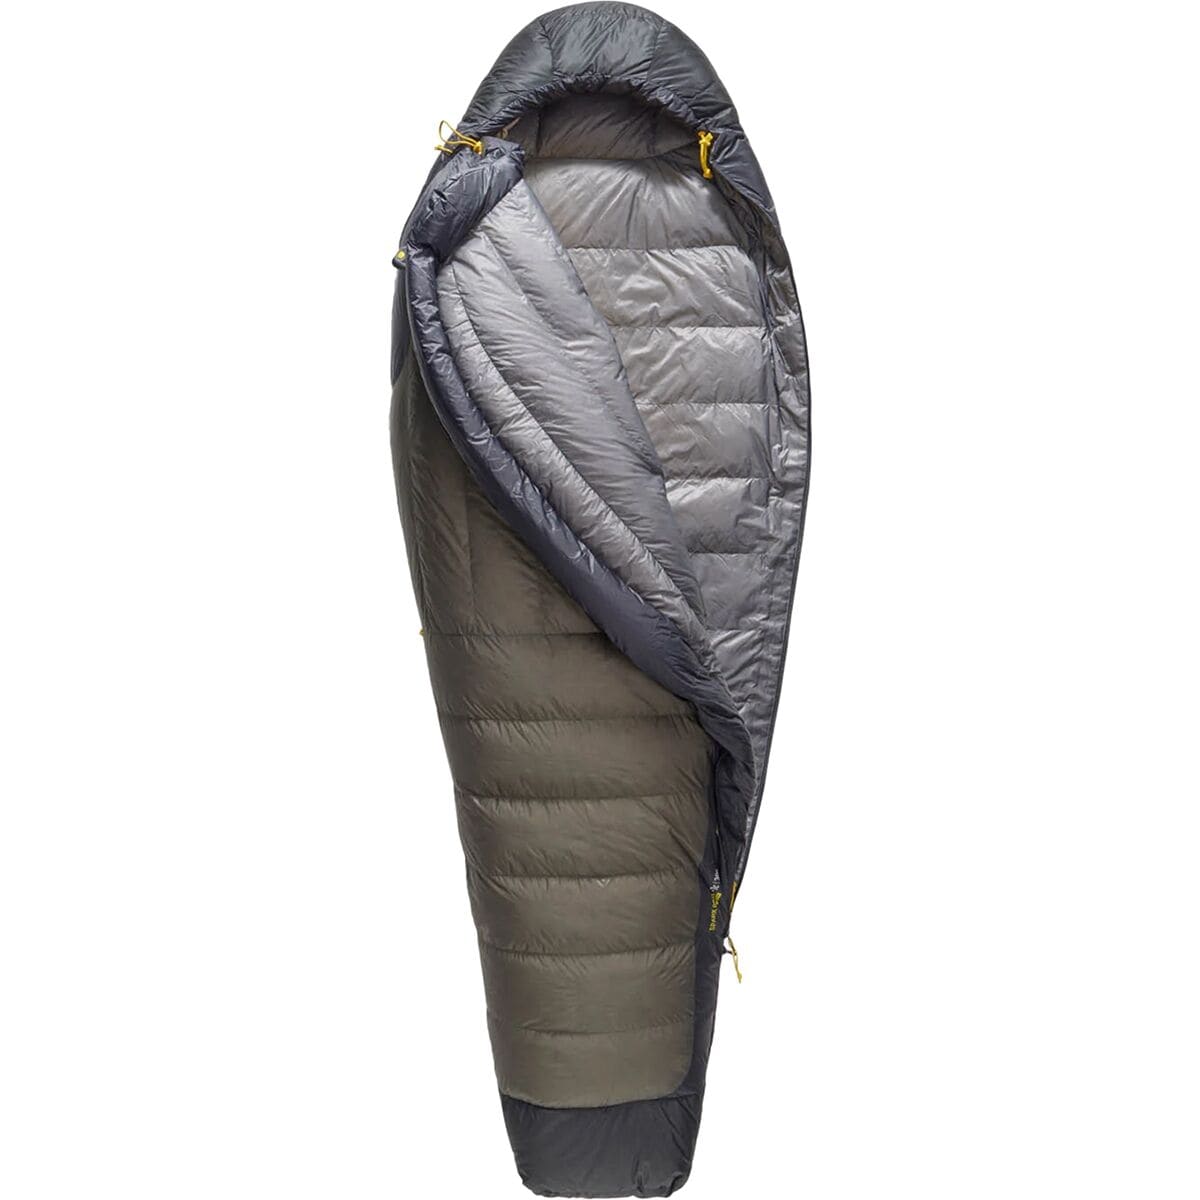 Photos - Suitcase / Backpack Cover Sea To Summit Spark Pro Sleeping Bag: 30F Down 